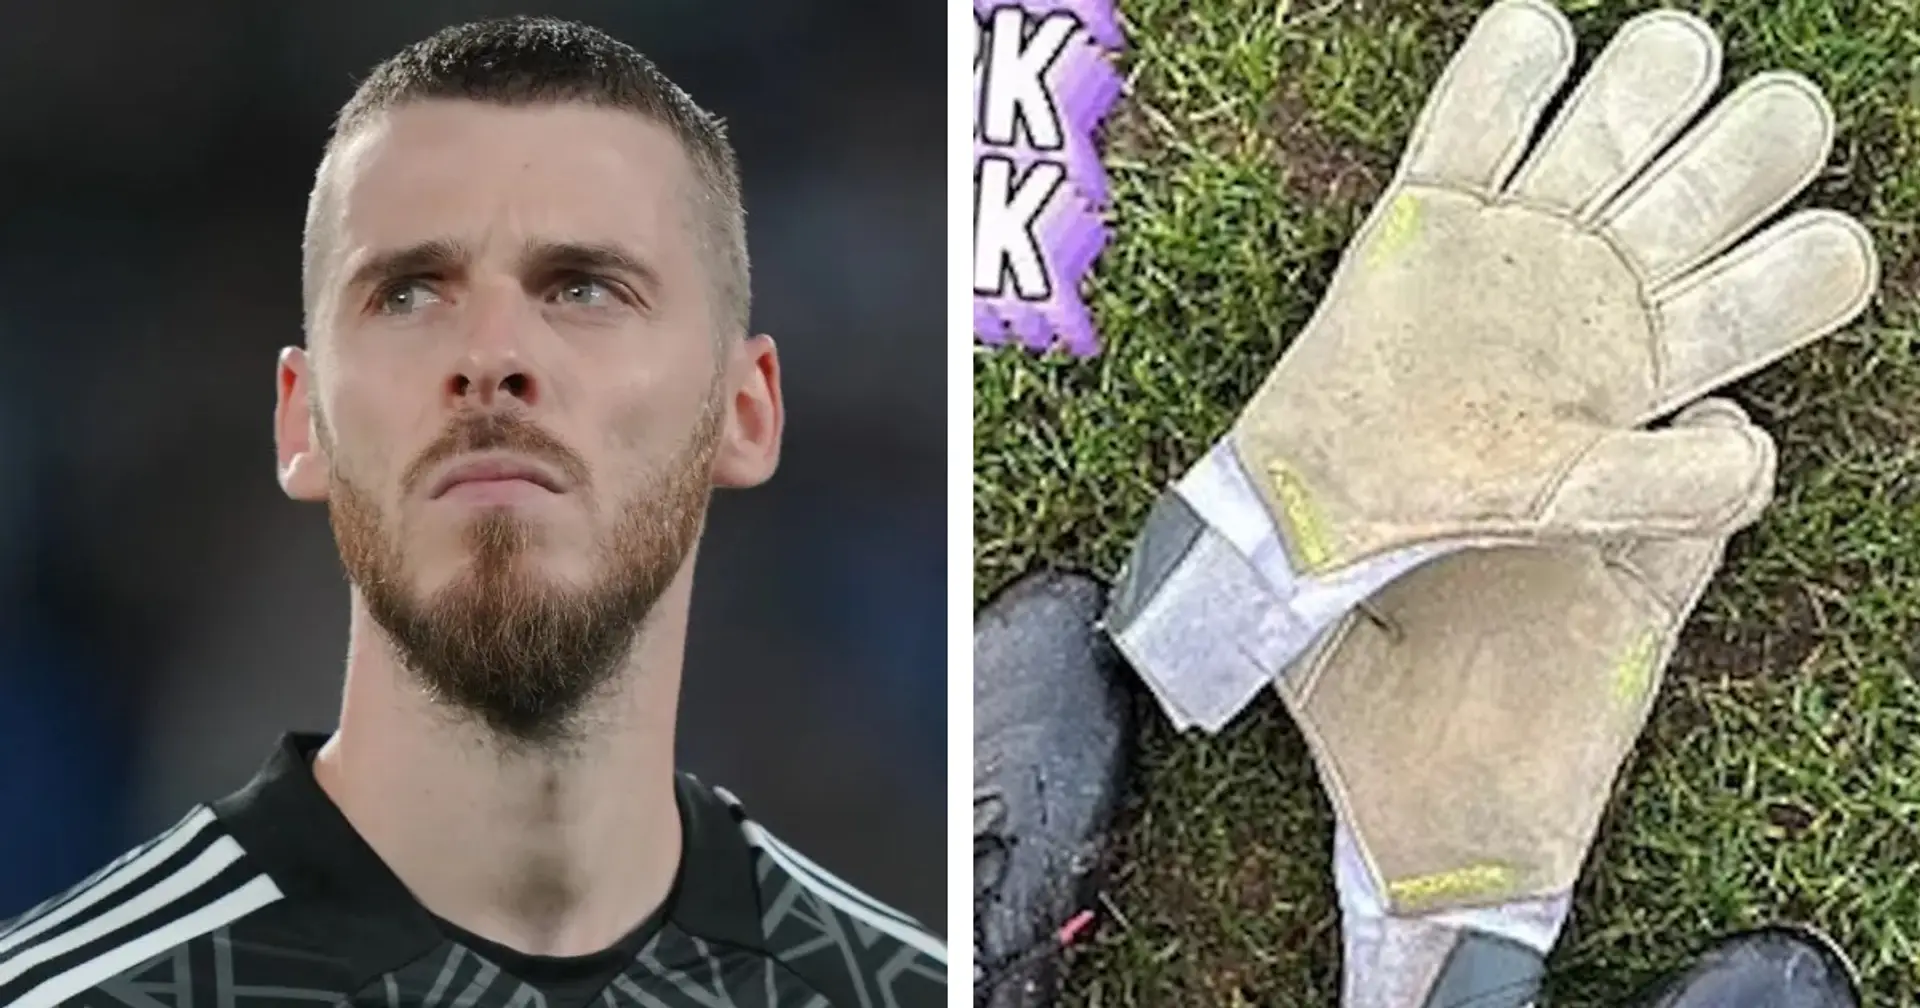 De Gea hints at possible Premier League return with cryptic message 